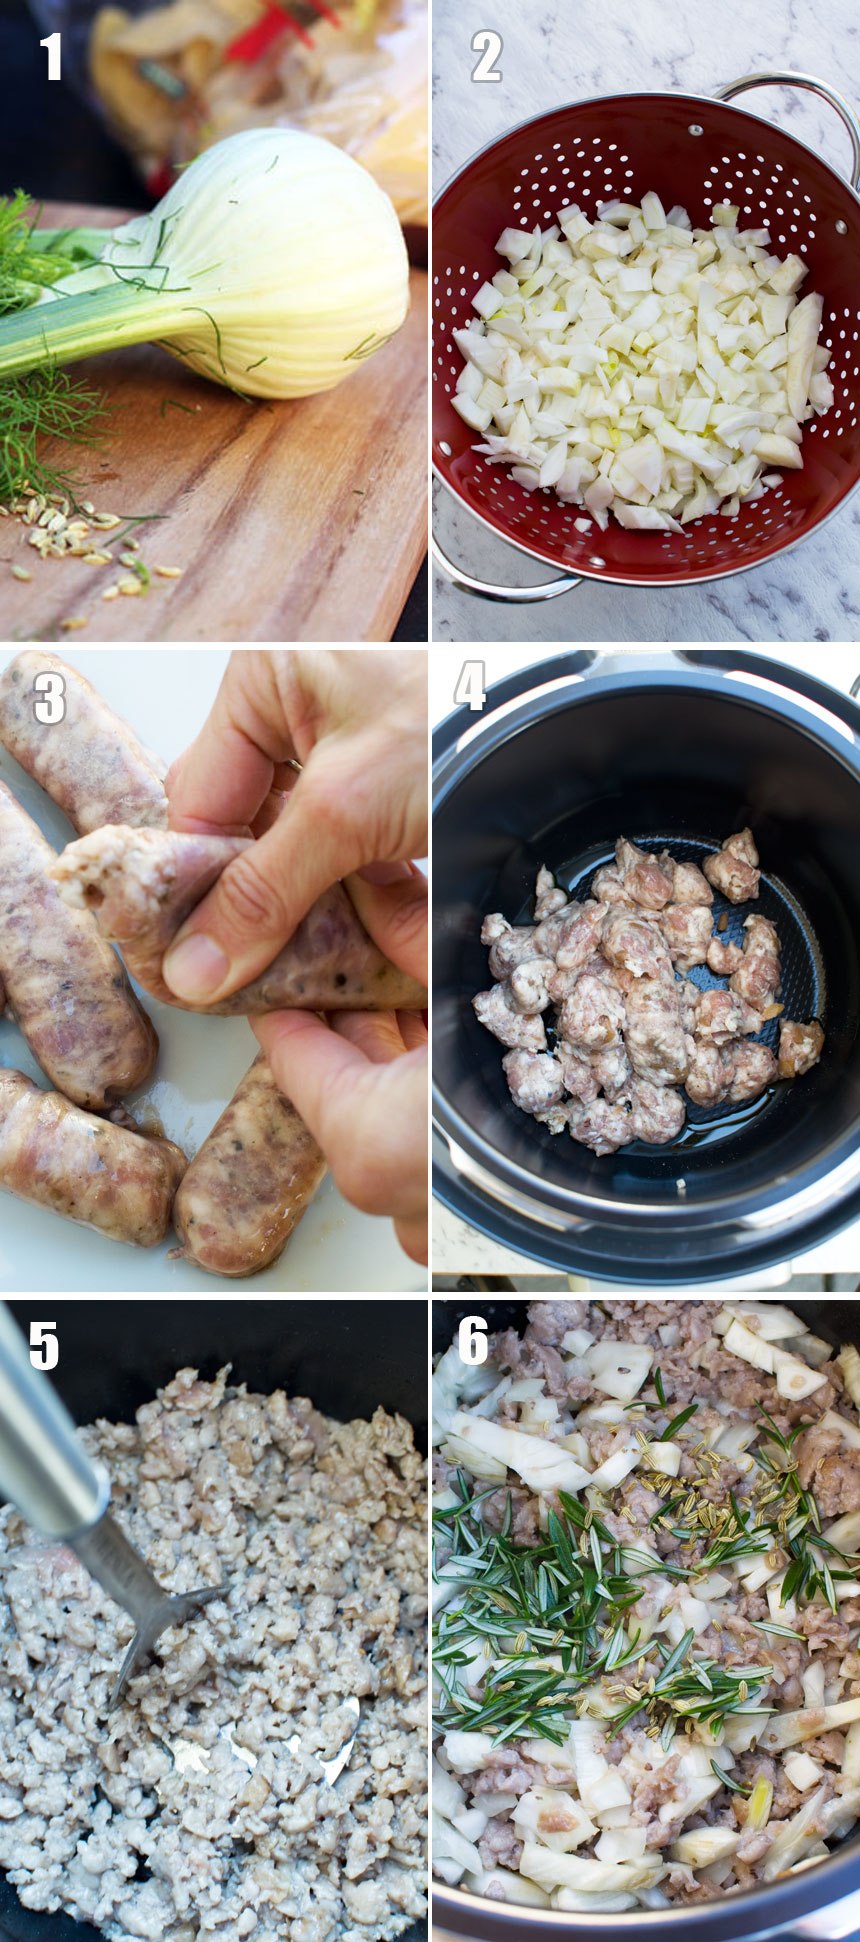 6 images showing how to make a sausage and fennel ragu for a pasta dish